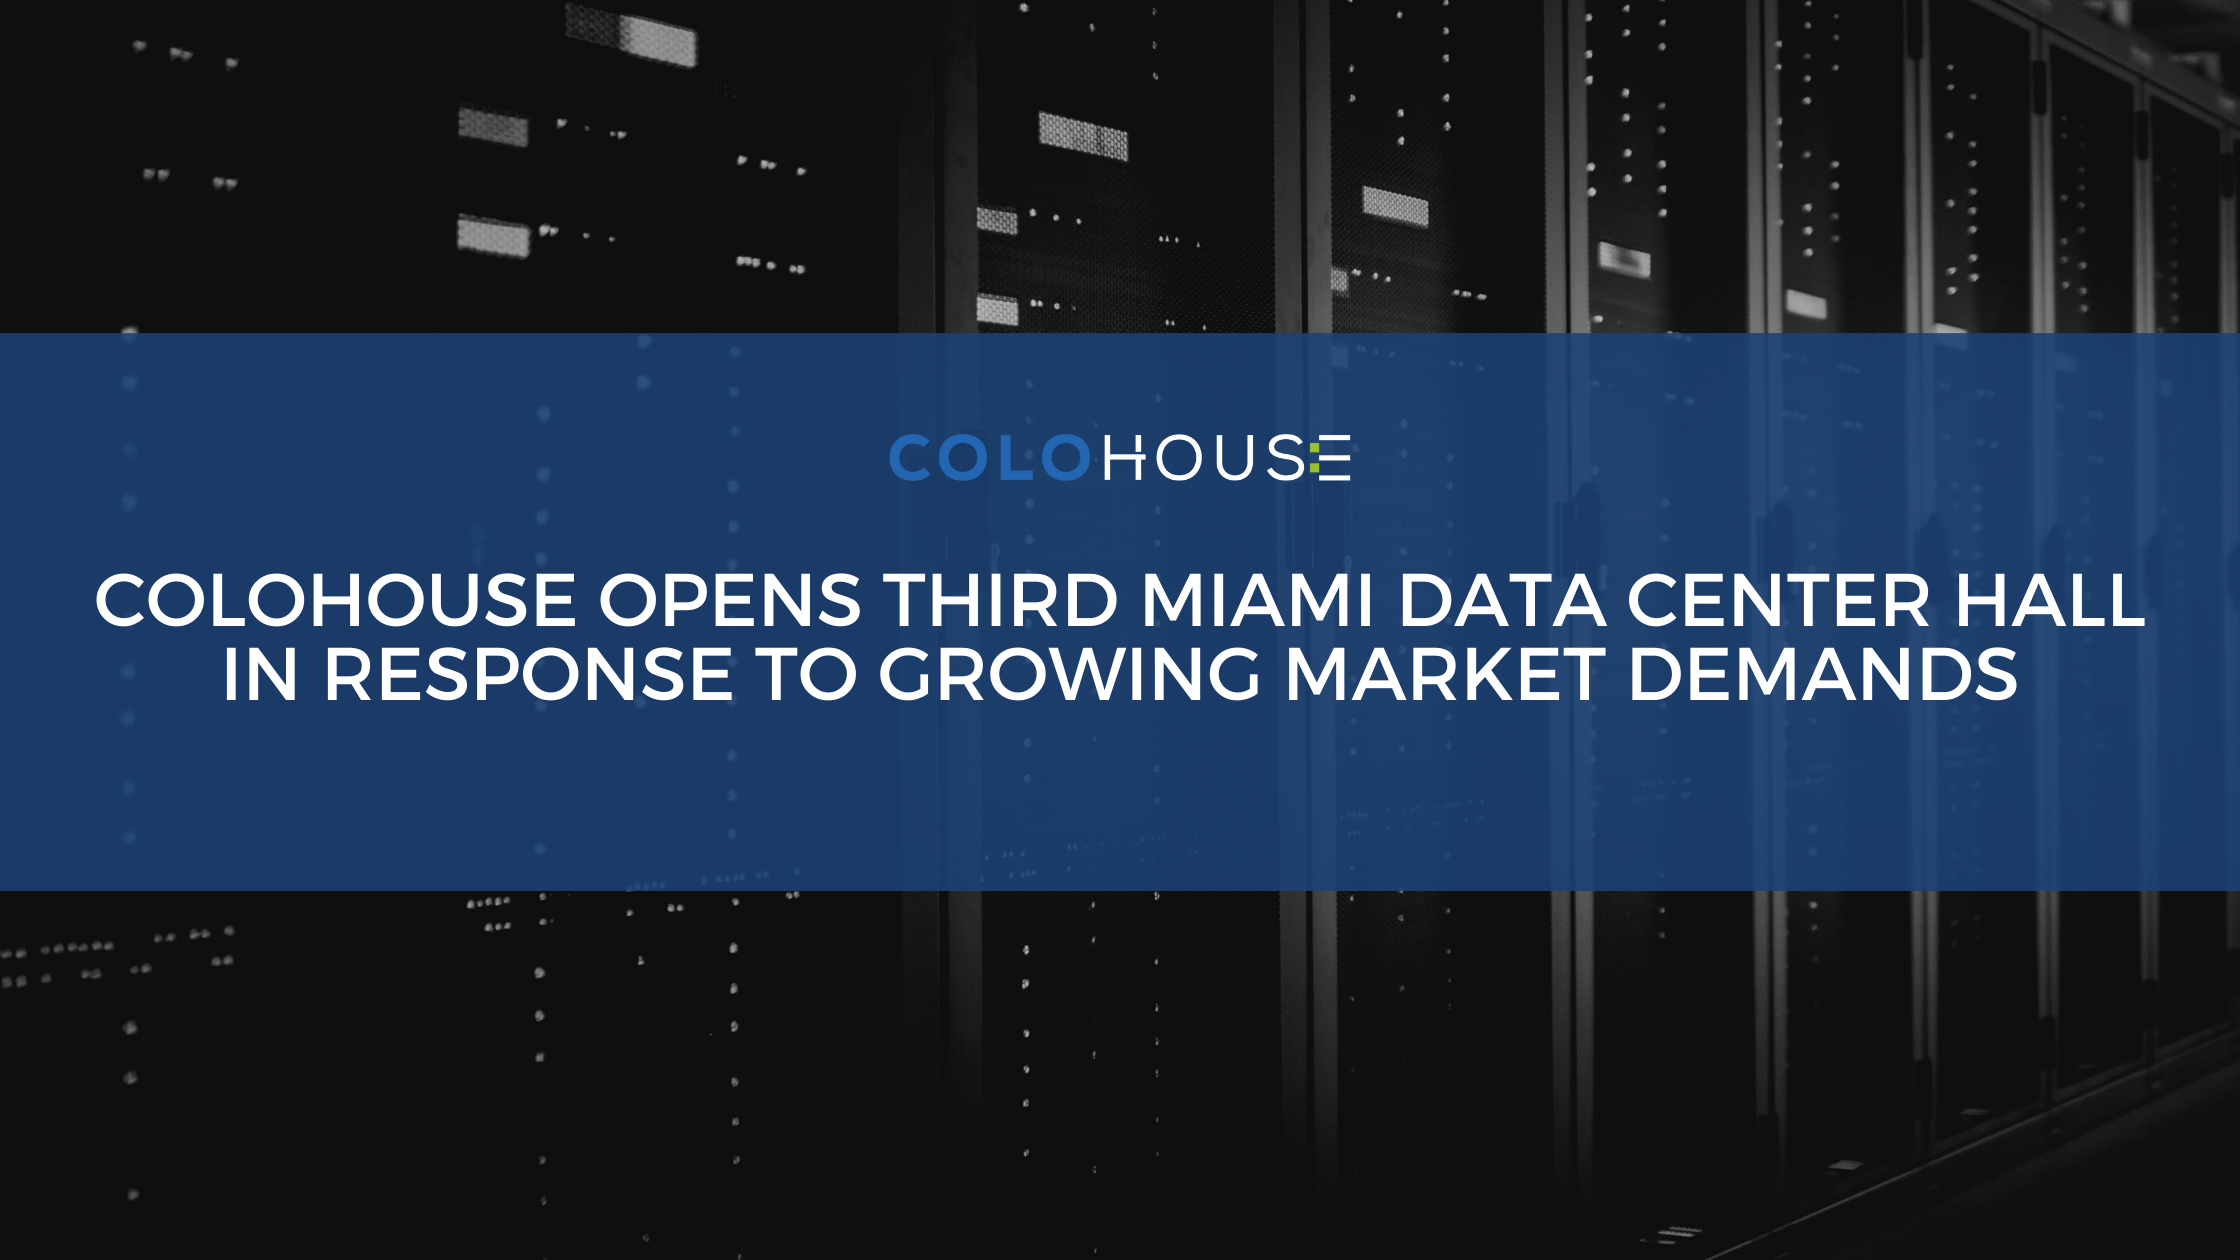 ColoHouse Opens Third Miami Data Center Hall in Response to Growing Market Demands